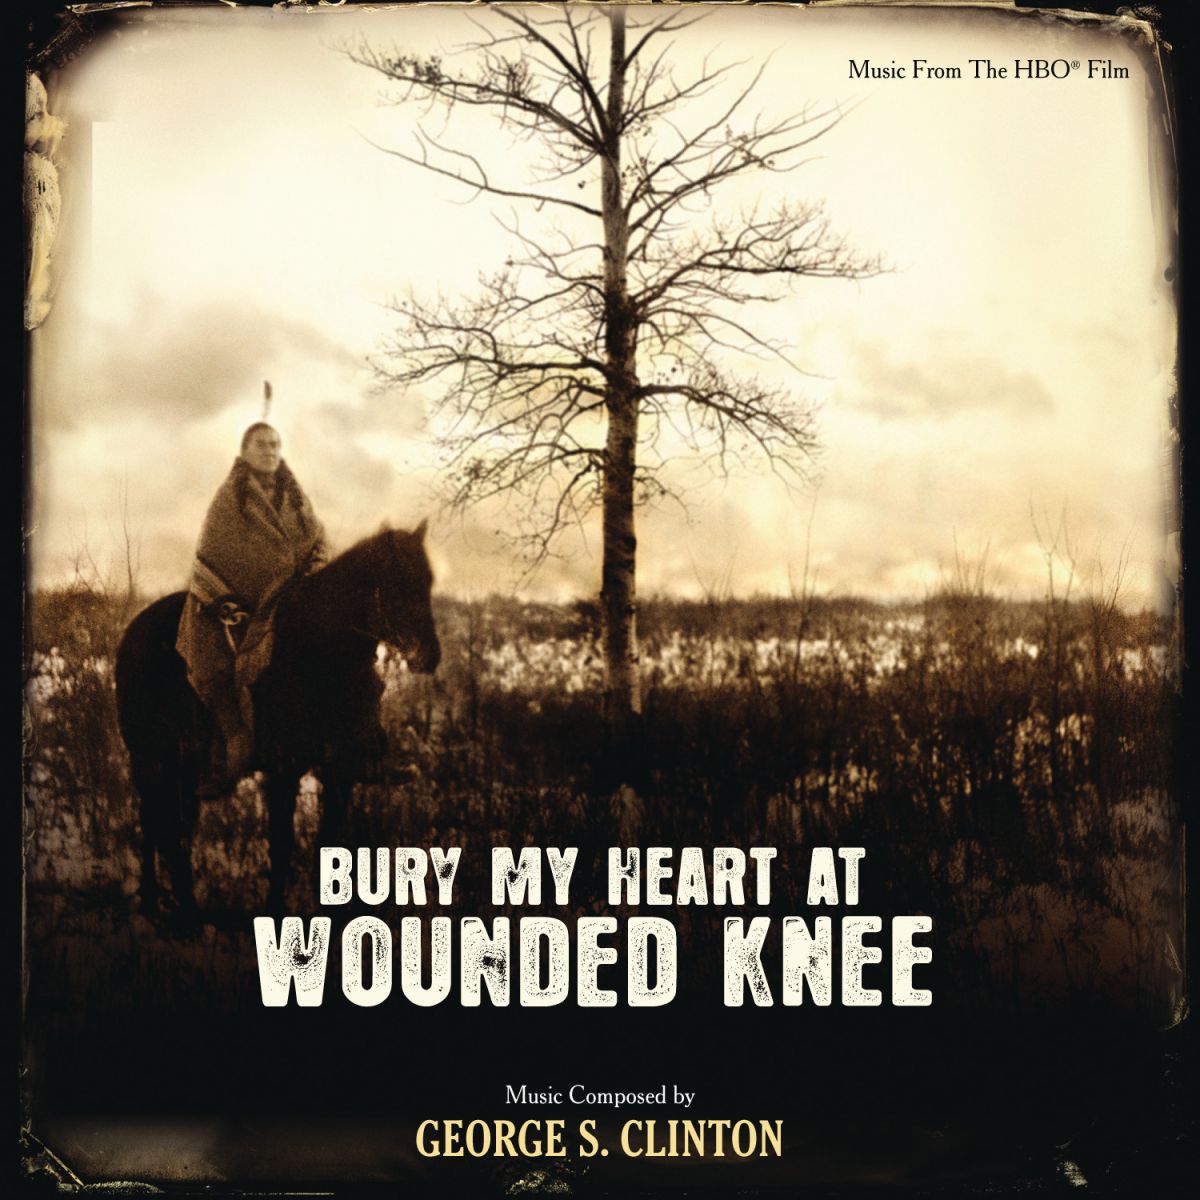 bury my heart at wounded knee soundtrack torrent